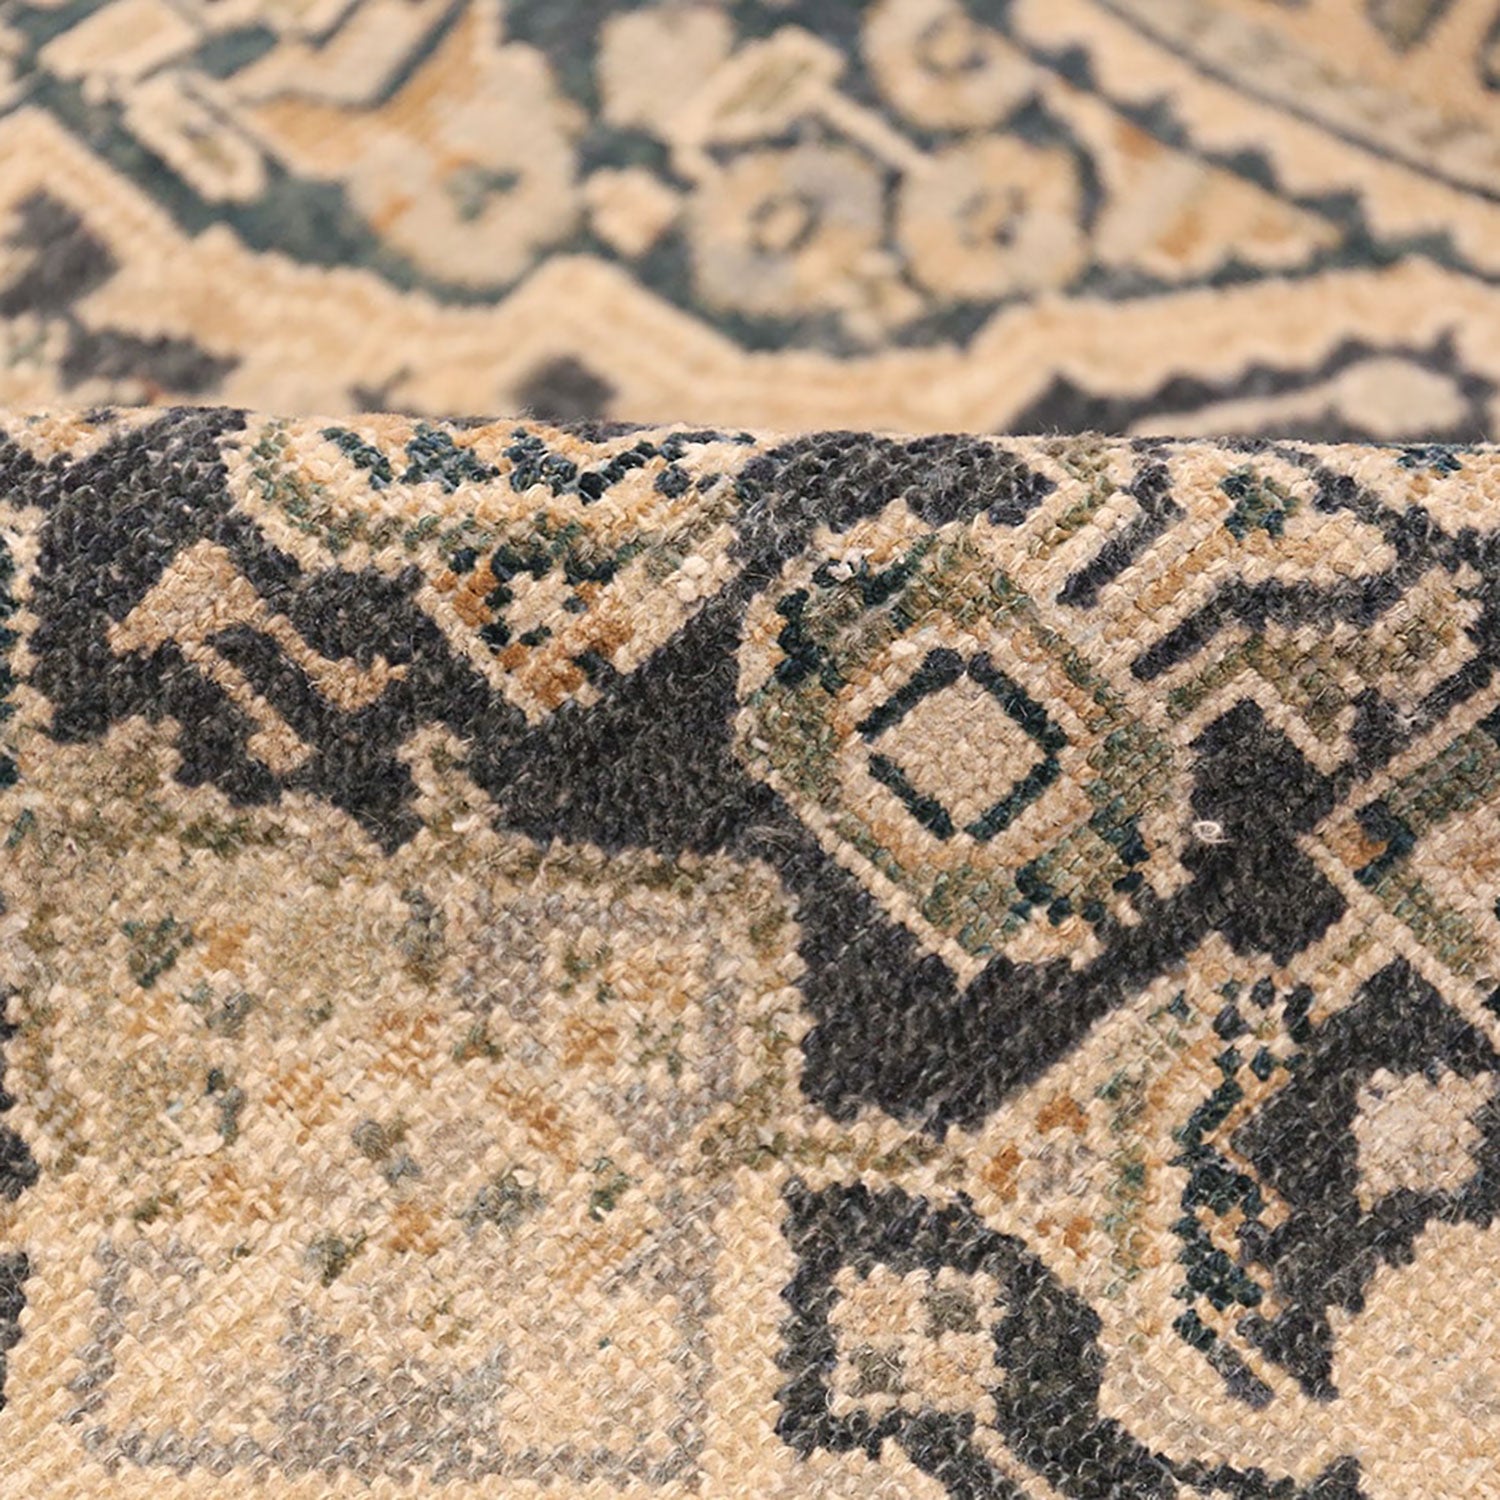 Intricately woven carpet exhibits rich colors and traditional patterns.